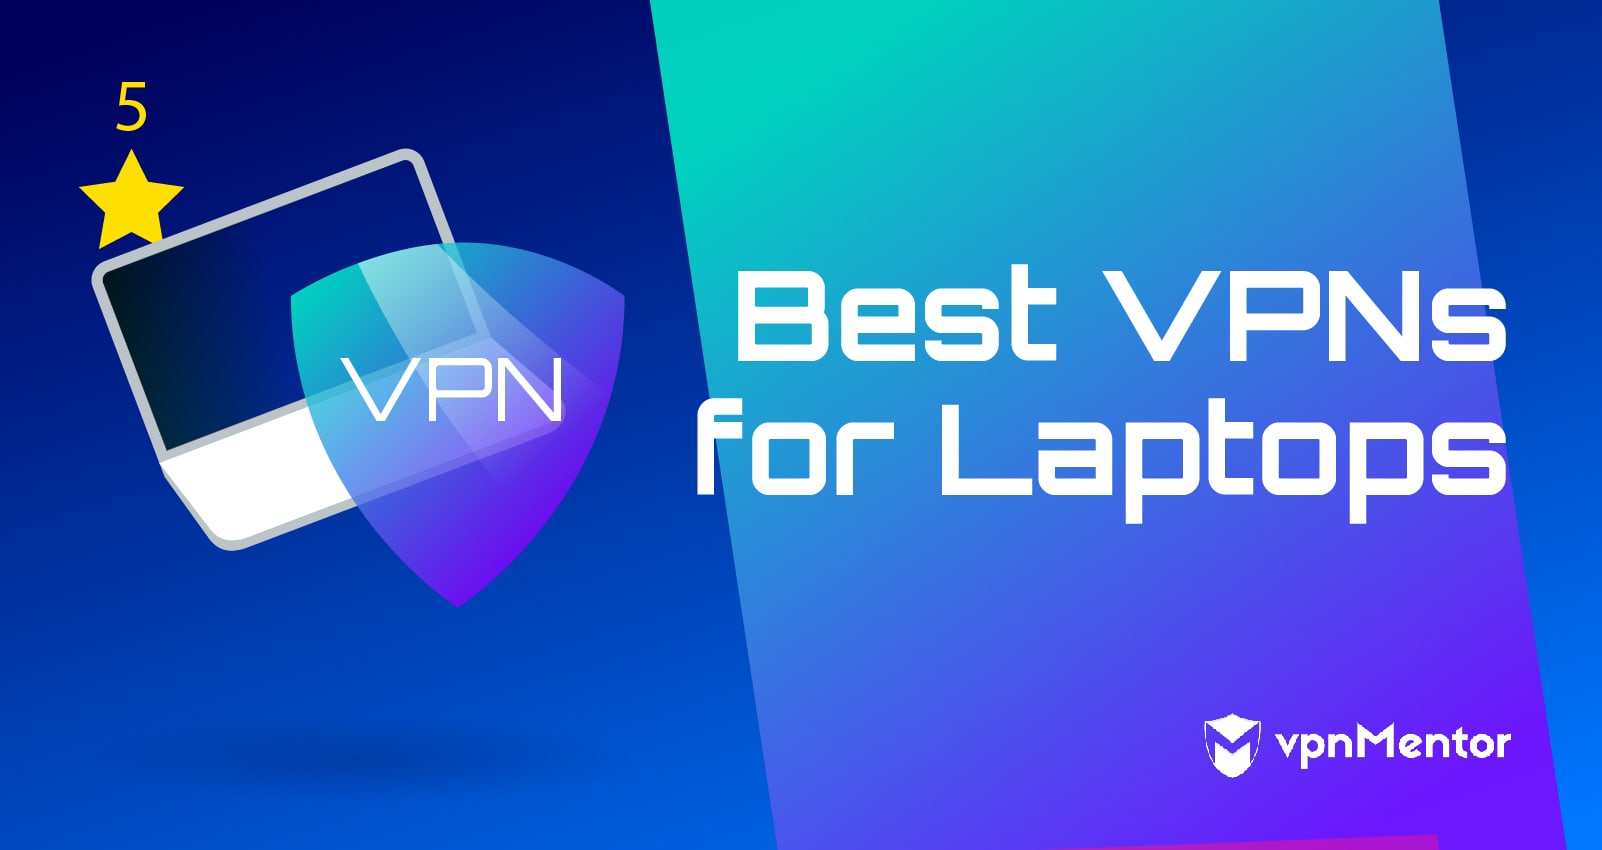 3 Best VPNs For Laptops in 2022 - Choose The Best One for You